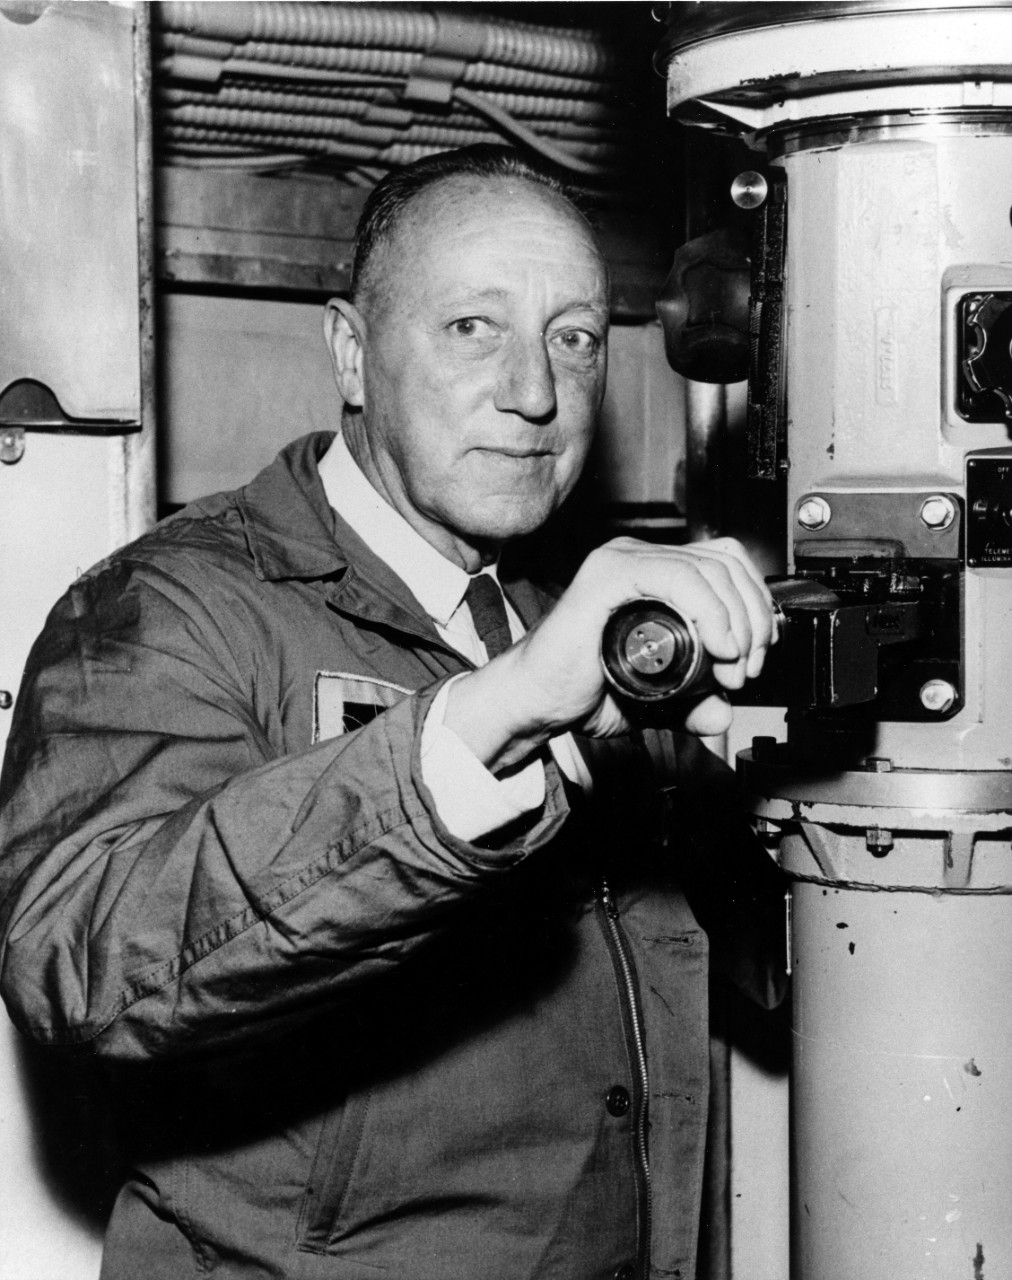 VADM Charles A. Lockwood, USN (Ret.) is shown at the periscope of the submarine off San Francisco, 24 June 1957. FADM Chester W. Nimitz  and other submarine admirals were also onboard, taking their first cruise on a nuclear submarine. 